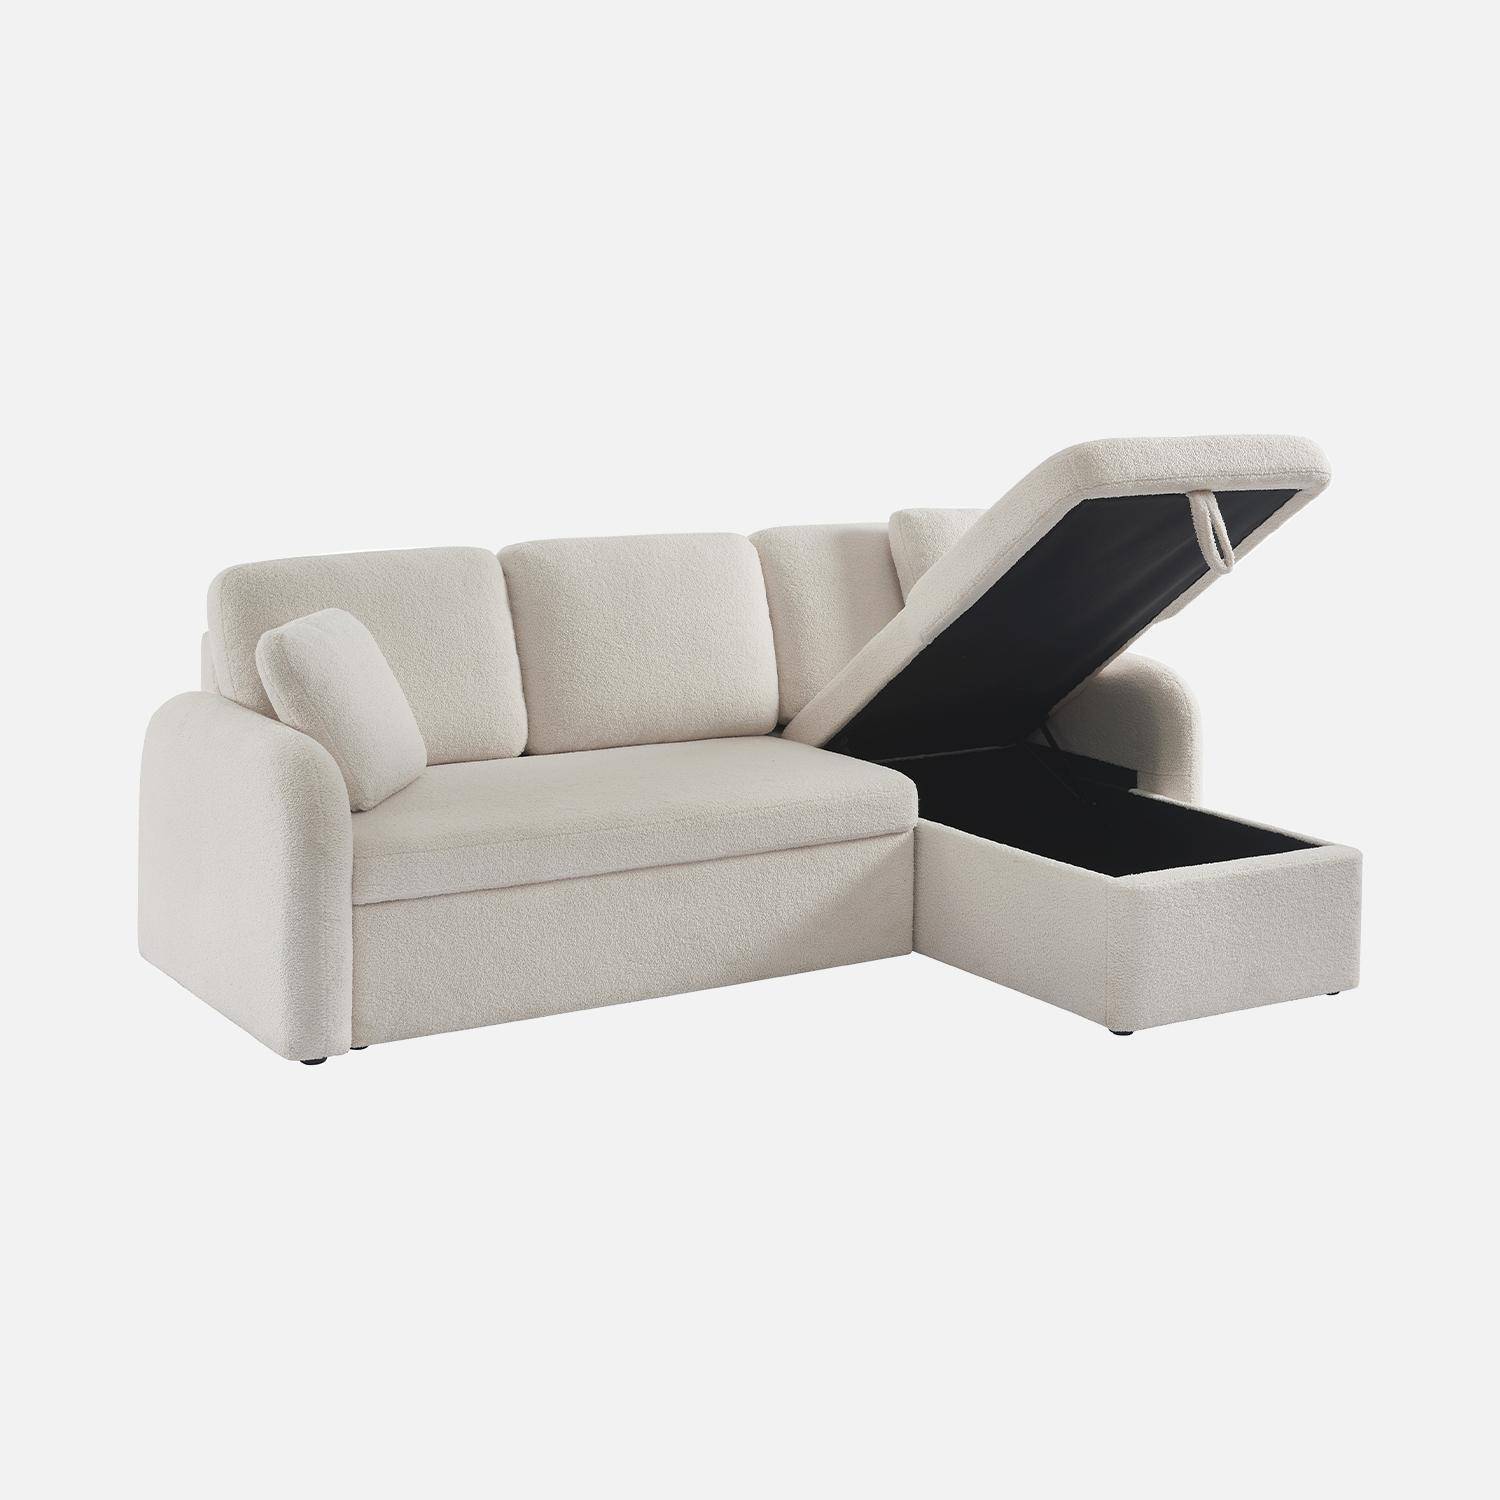 3-seater reversible corner sofa bed with storage box - Milano, Ecru, boucle fabric, rounded lines,sweeek,Photo6